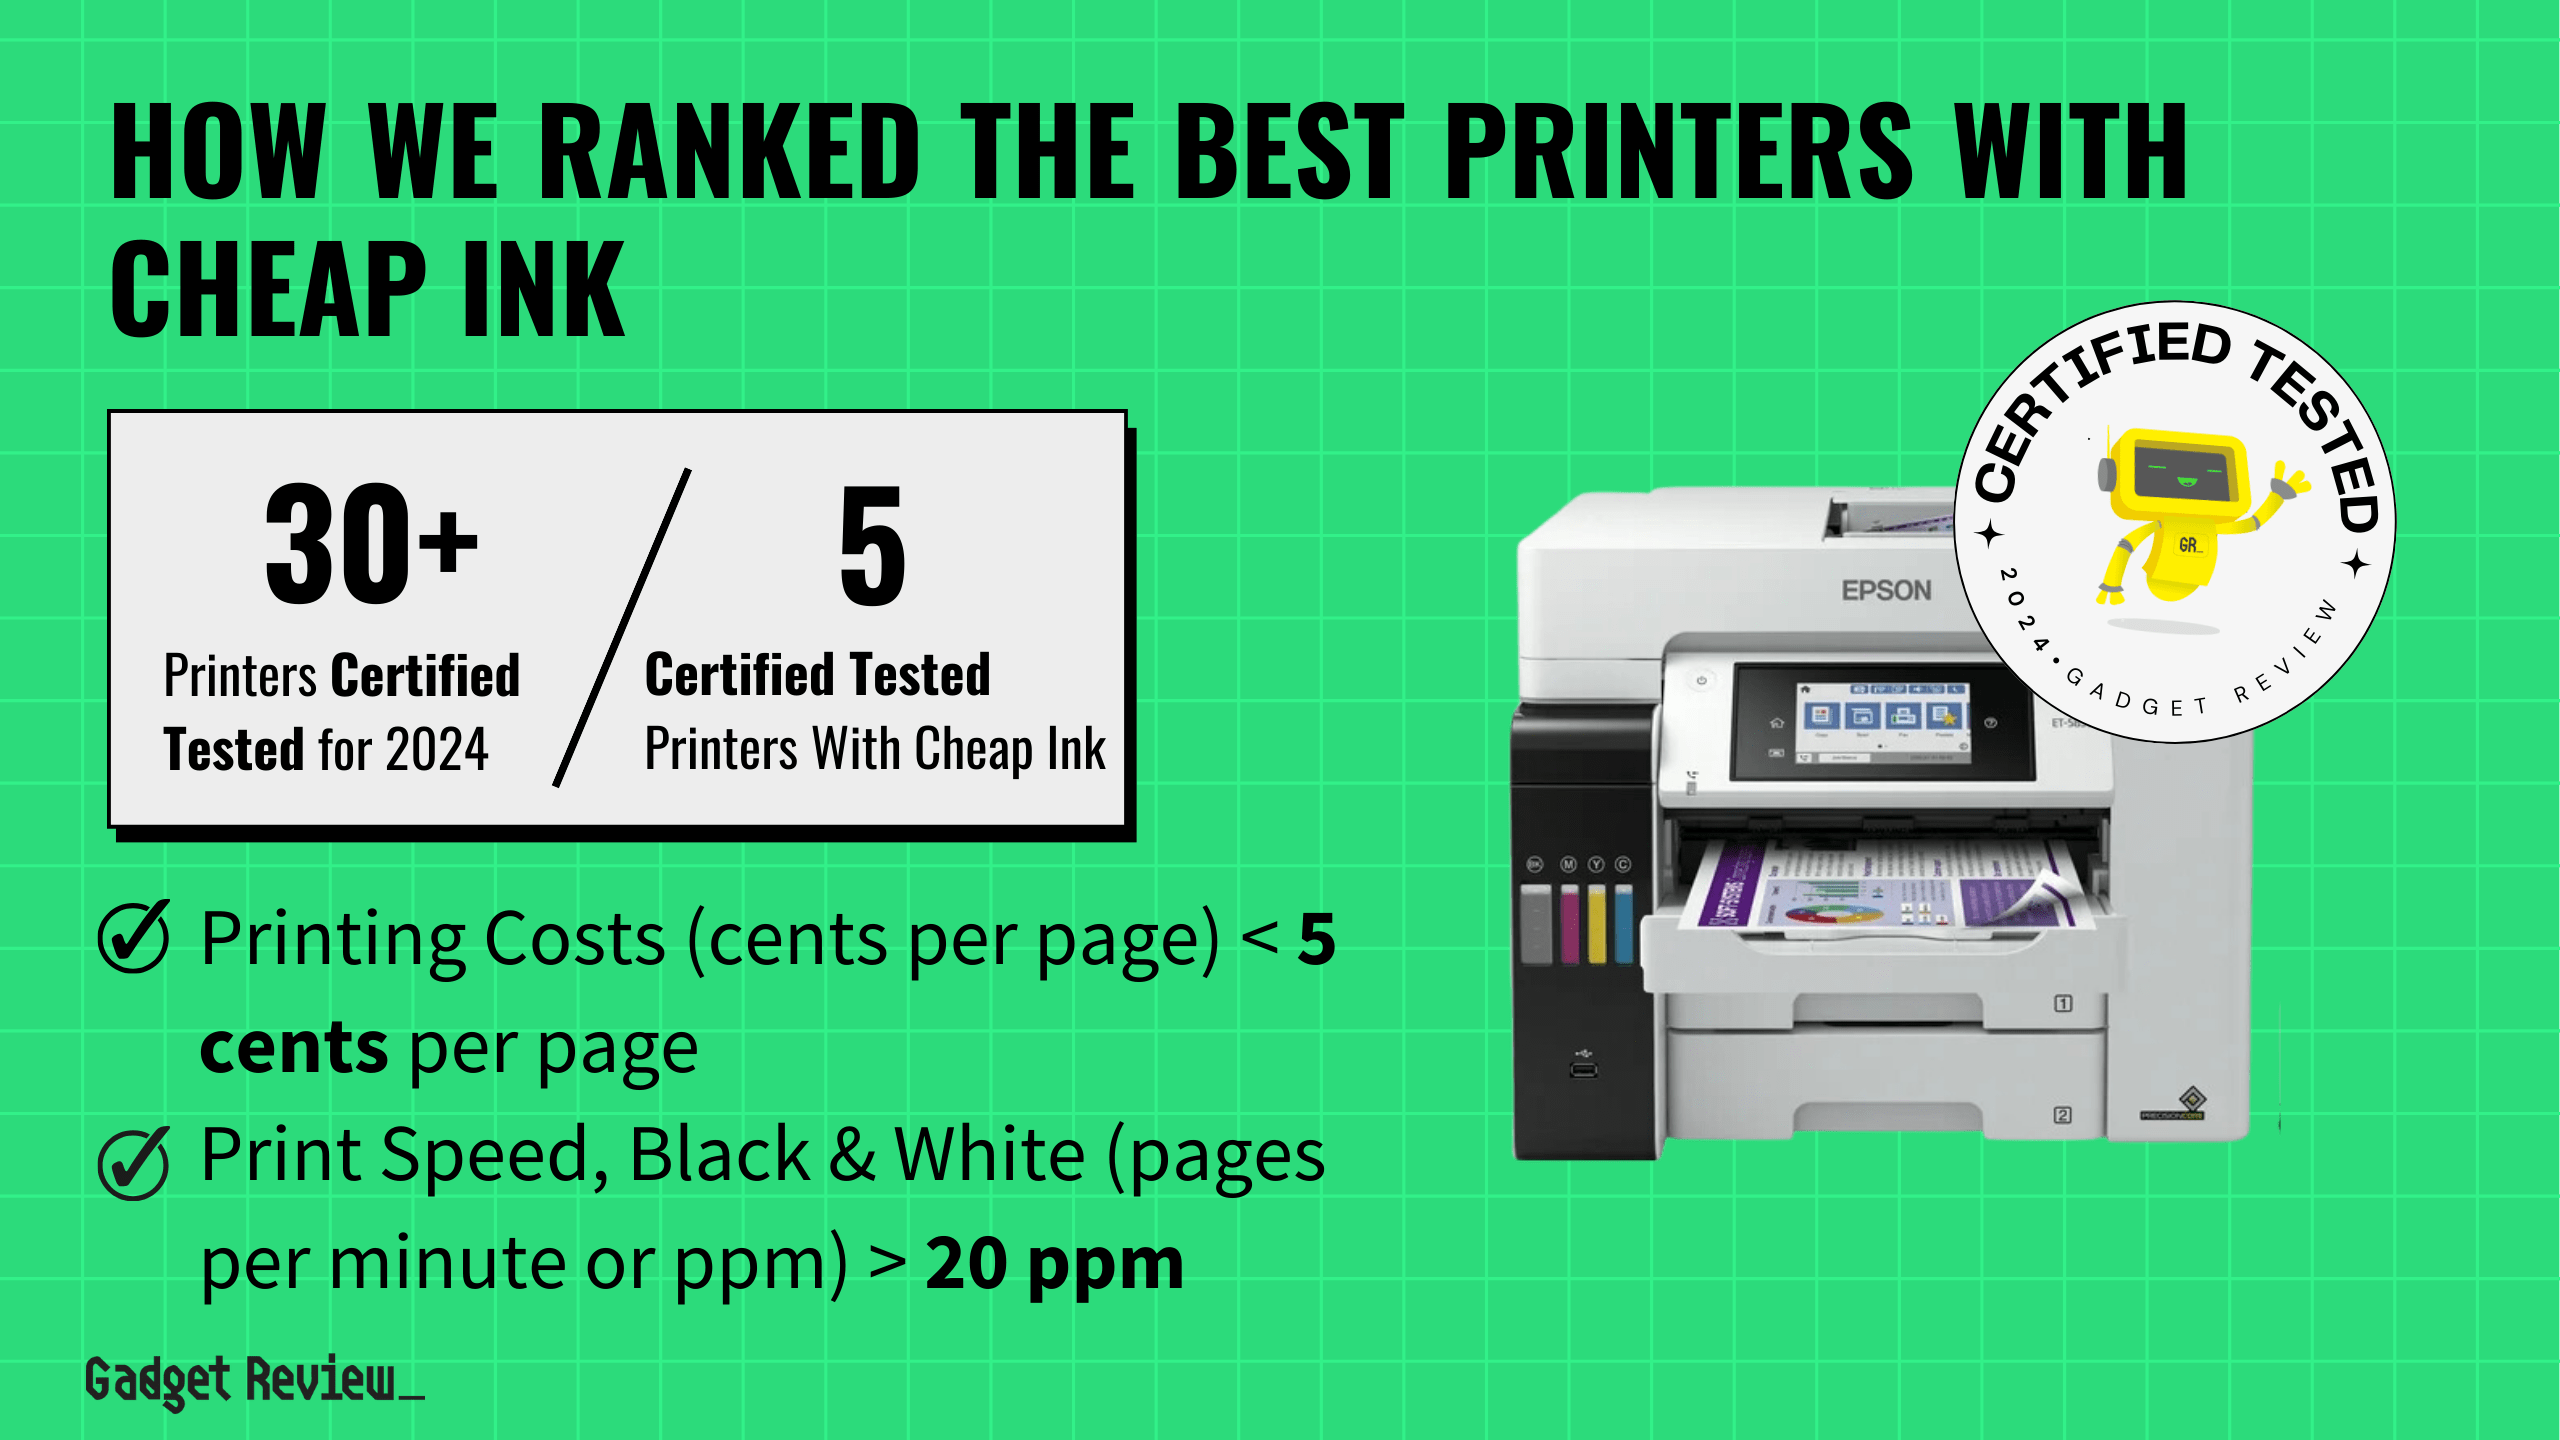 What are the Top Printers with Cheap Ink?